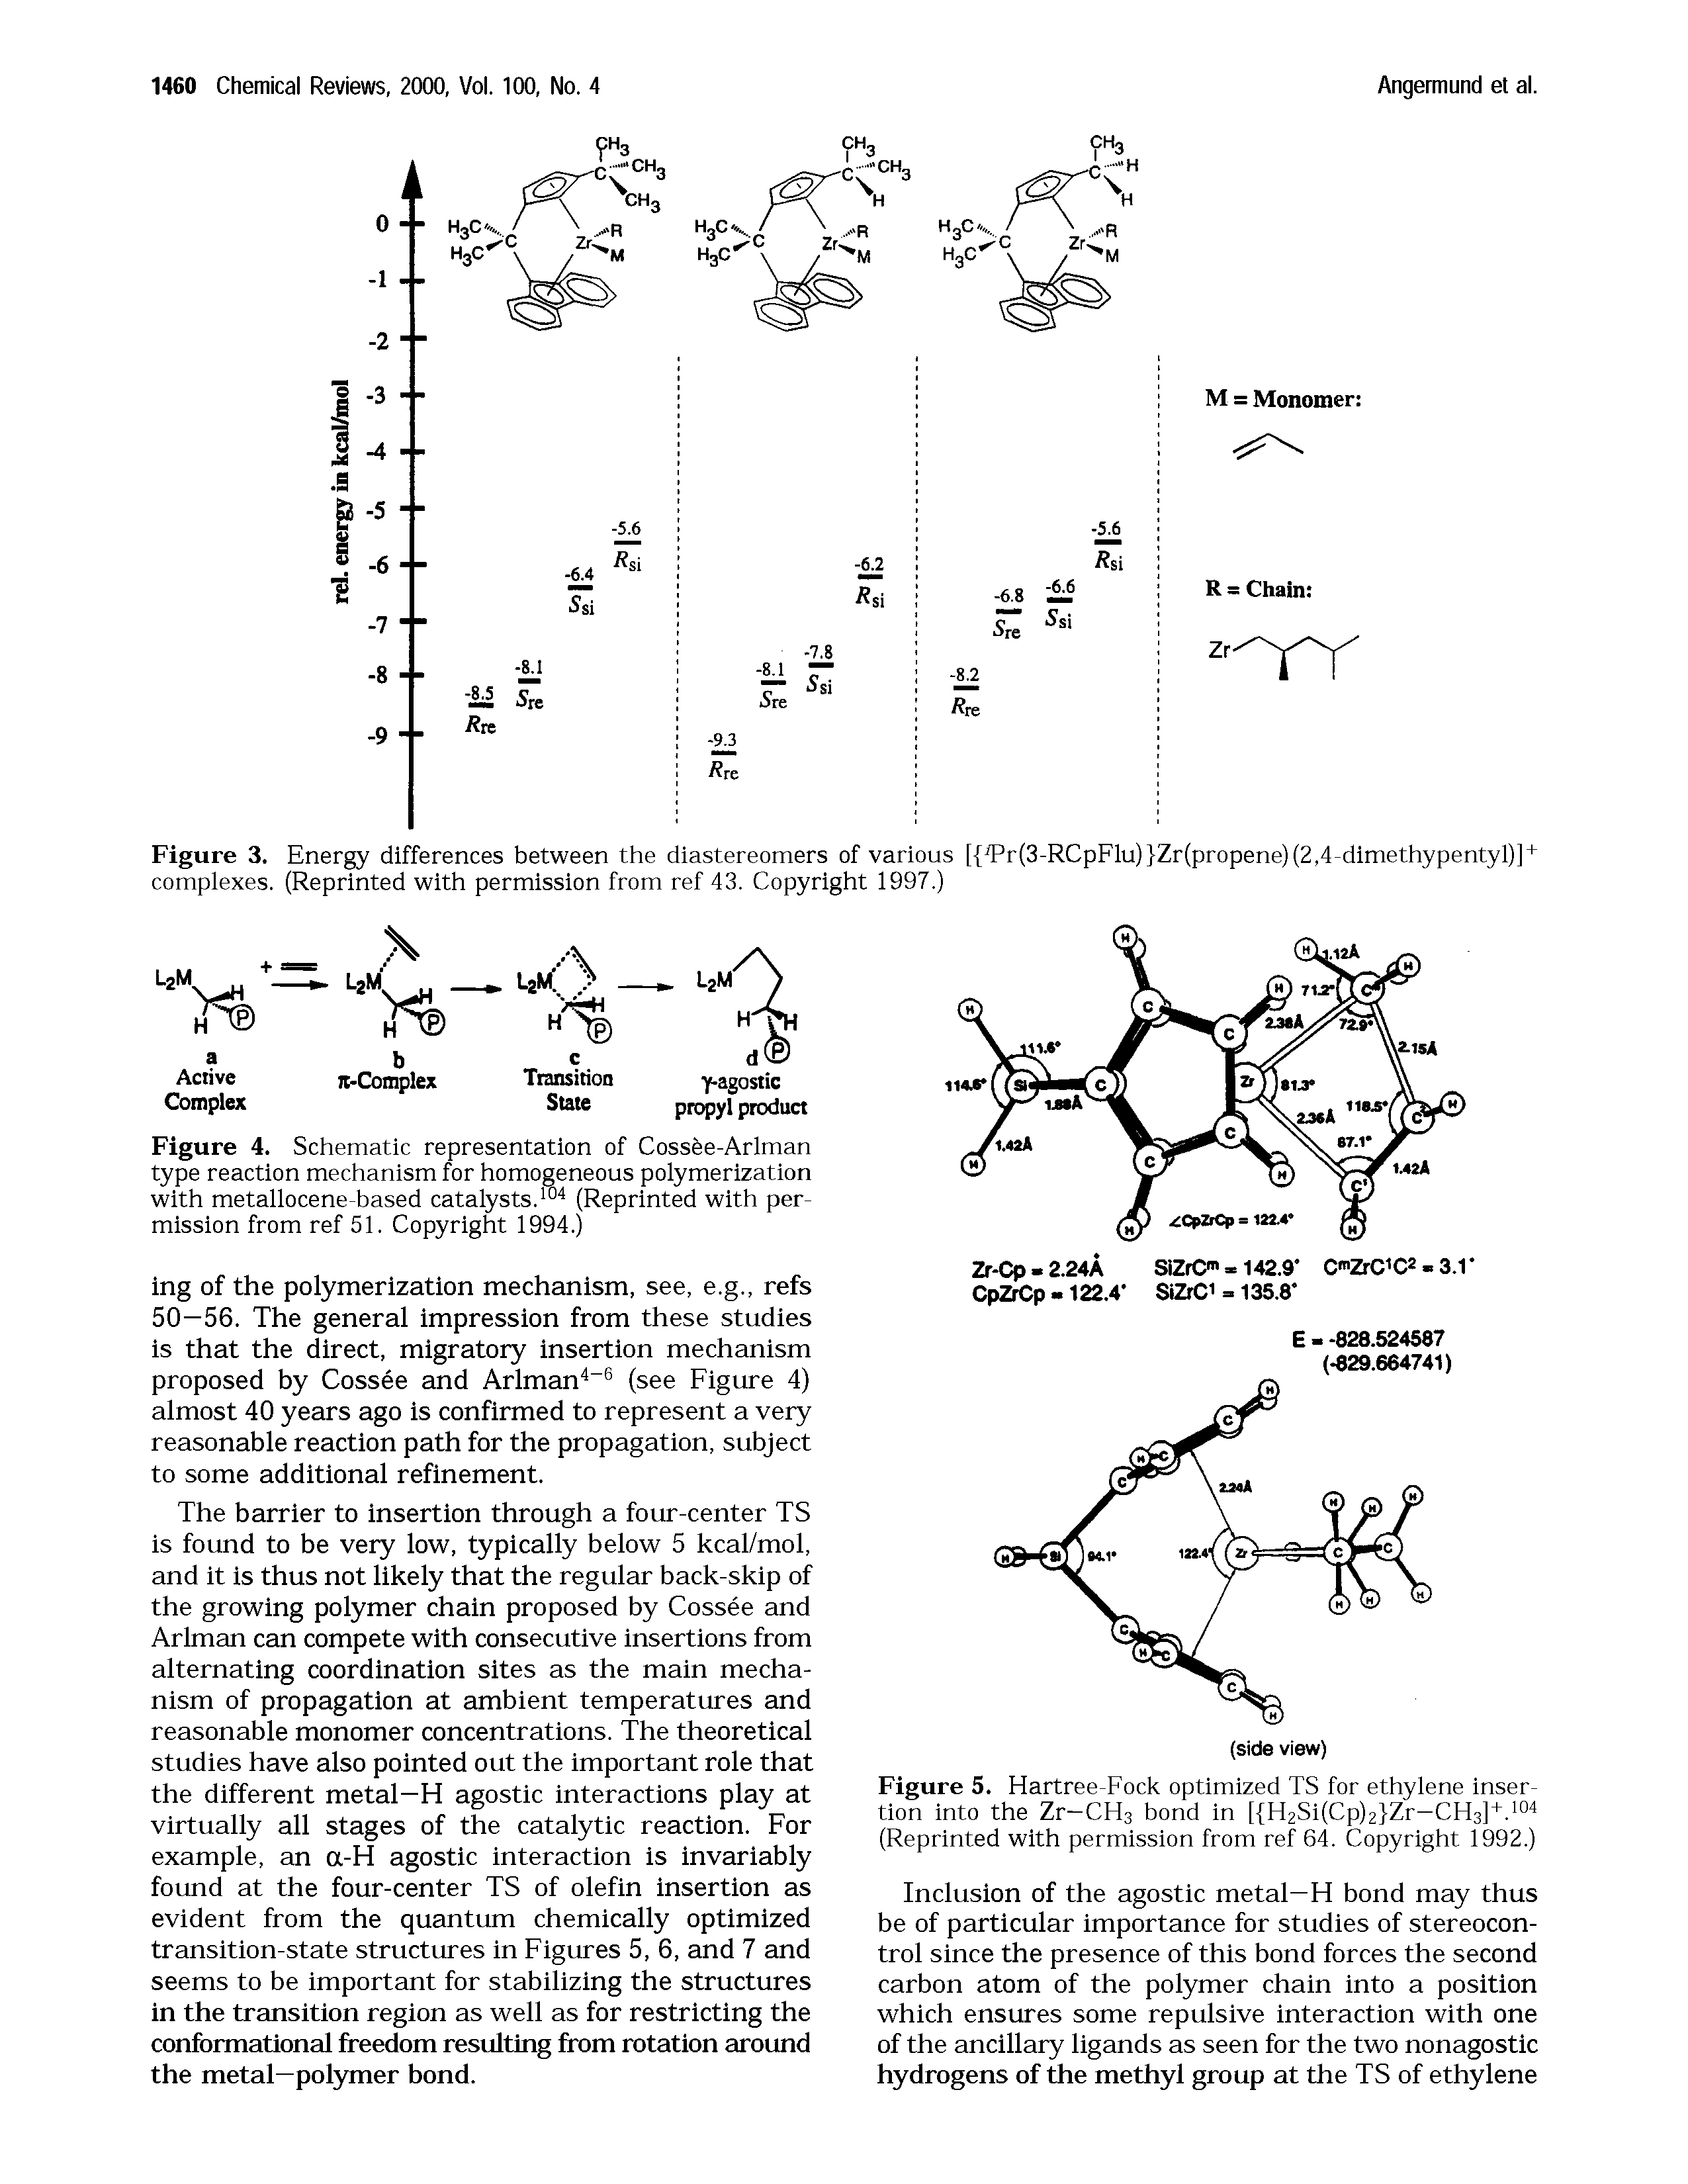 Figure 4. Schematic representation of Cossee-Arlman type reaction mechanism for homogeneous polymerization with metallocene-based catalysts.(Reprinted with permission from ref 51. Copyright 1994.)...